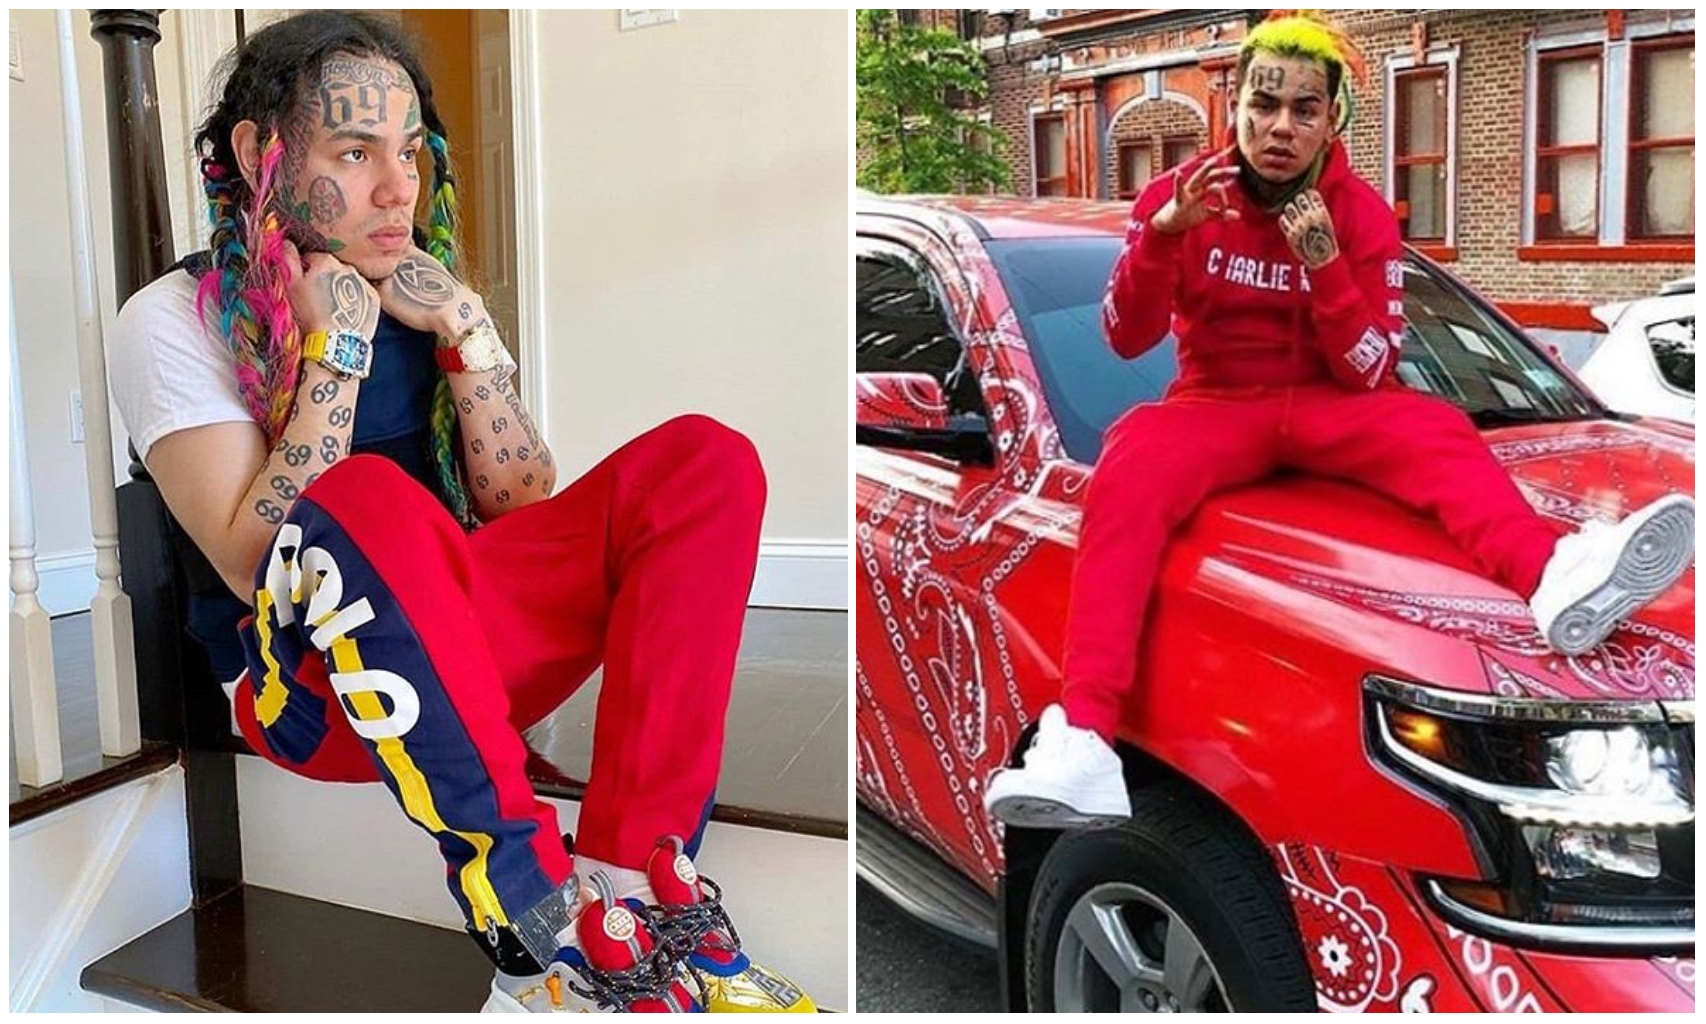 6ix9ine attacks other rappers calls them “little dog” says he’s the “Big Dog” (Video)